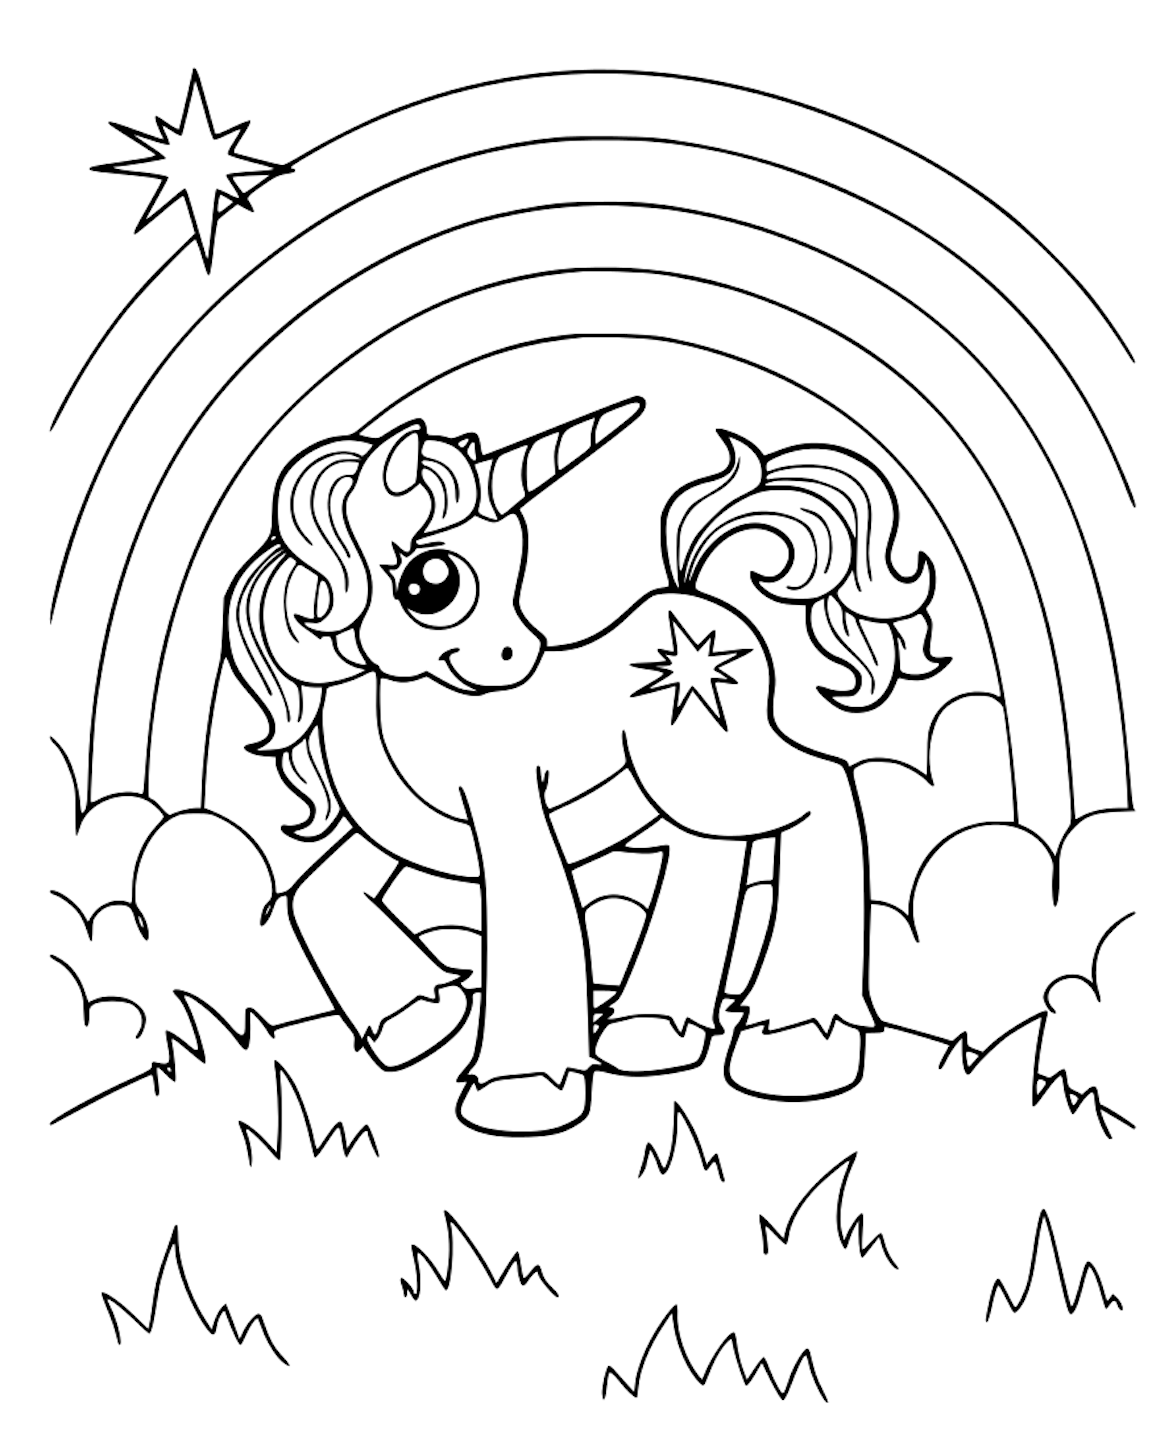 Cute Unicorn Coloring Pages And Other Top 20 Coloring Themes ...